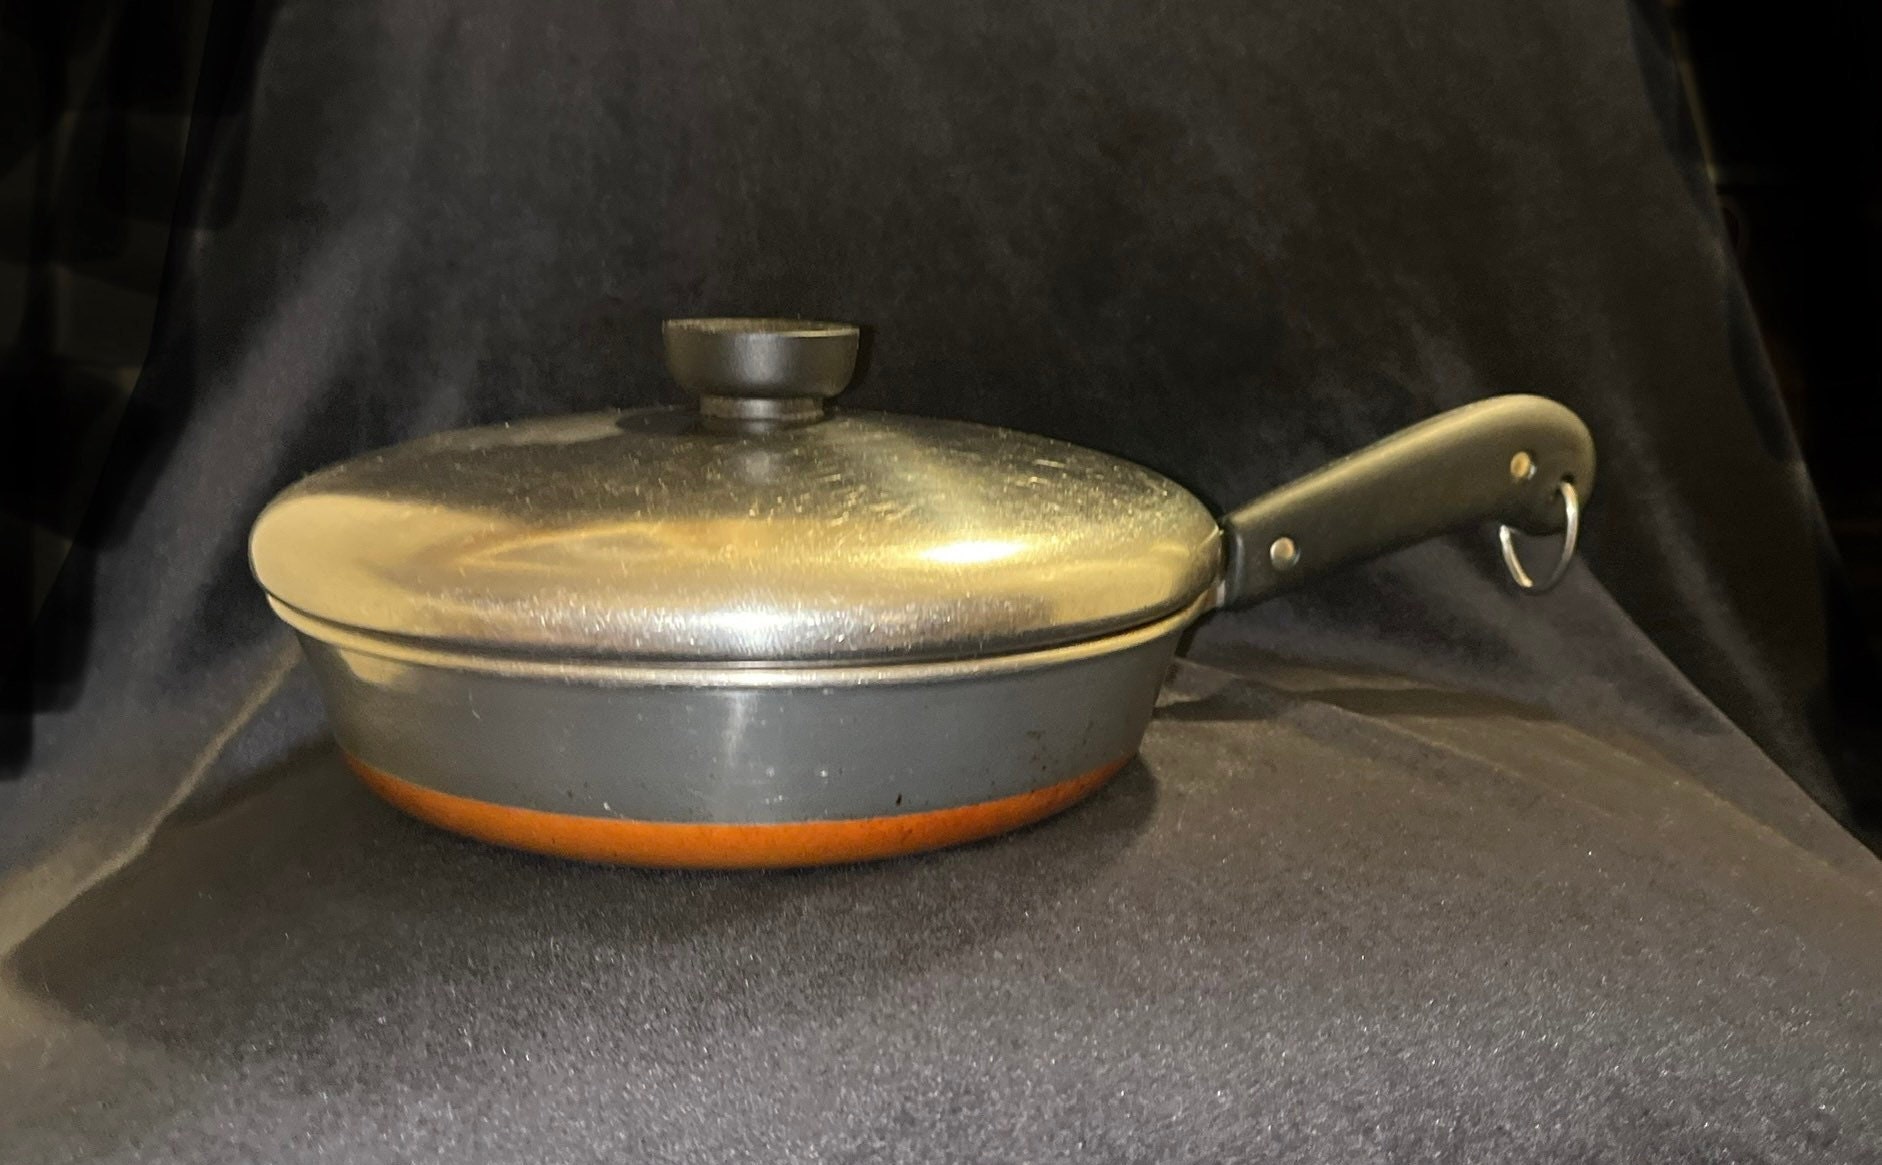 RARE 8 PC. REVERE WARE 1938 to 1948 COPPER BOTTOM STAINLESS STEEL COOKWARE  SET